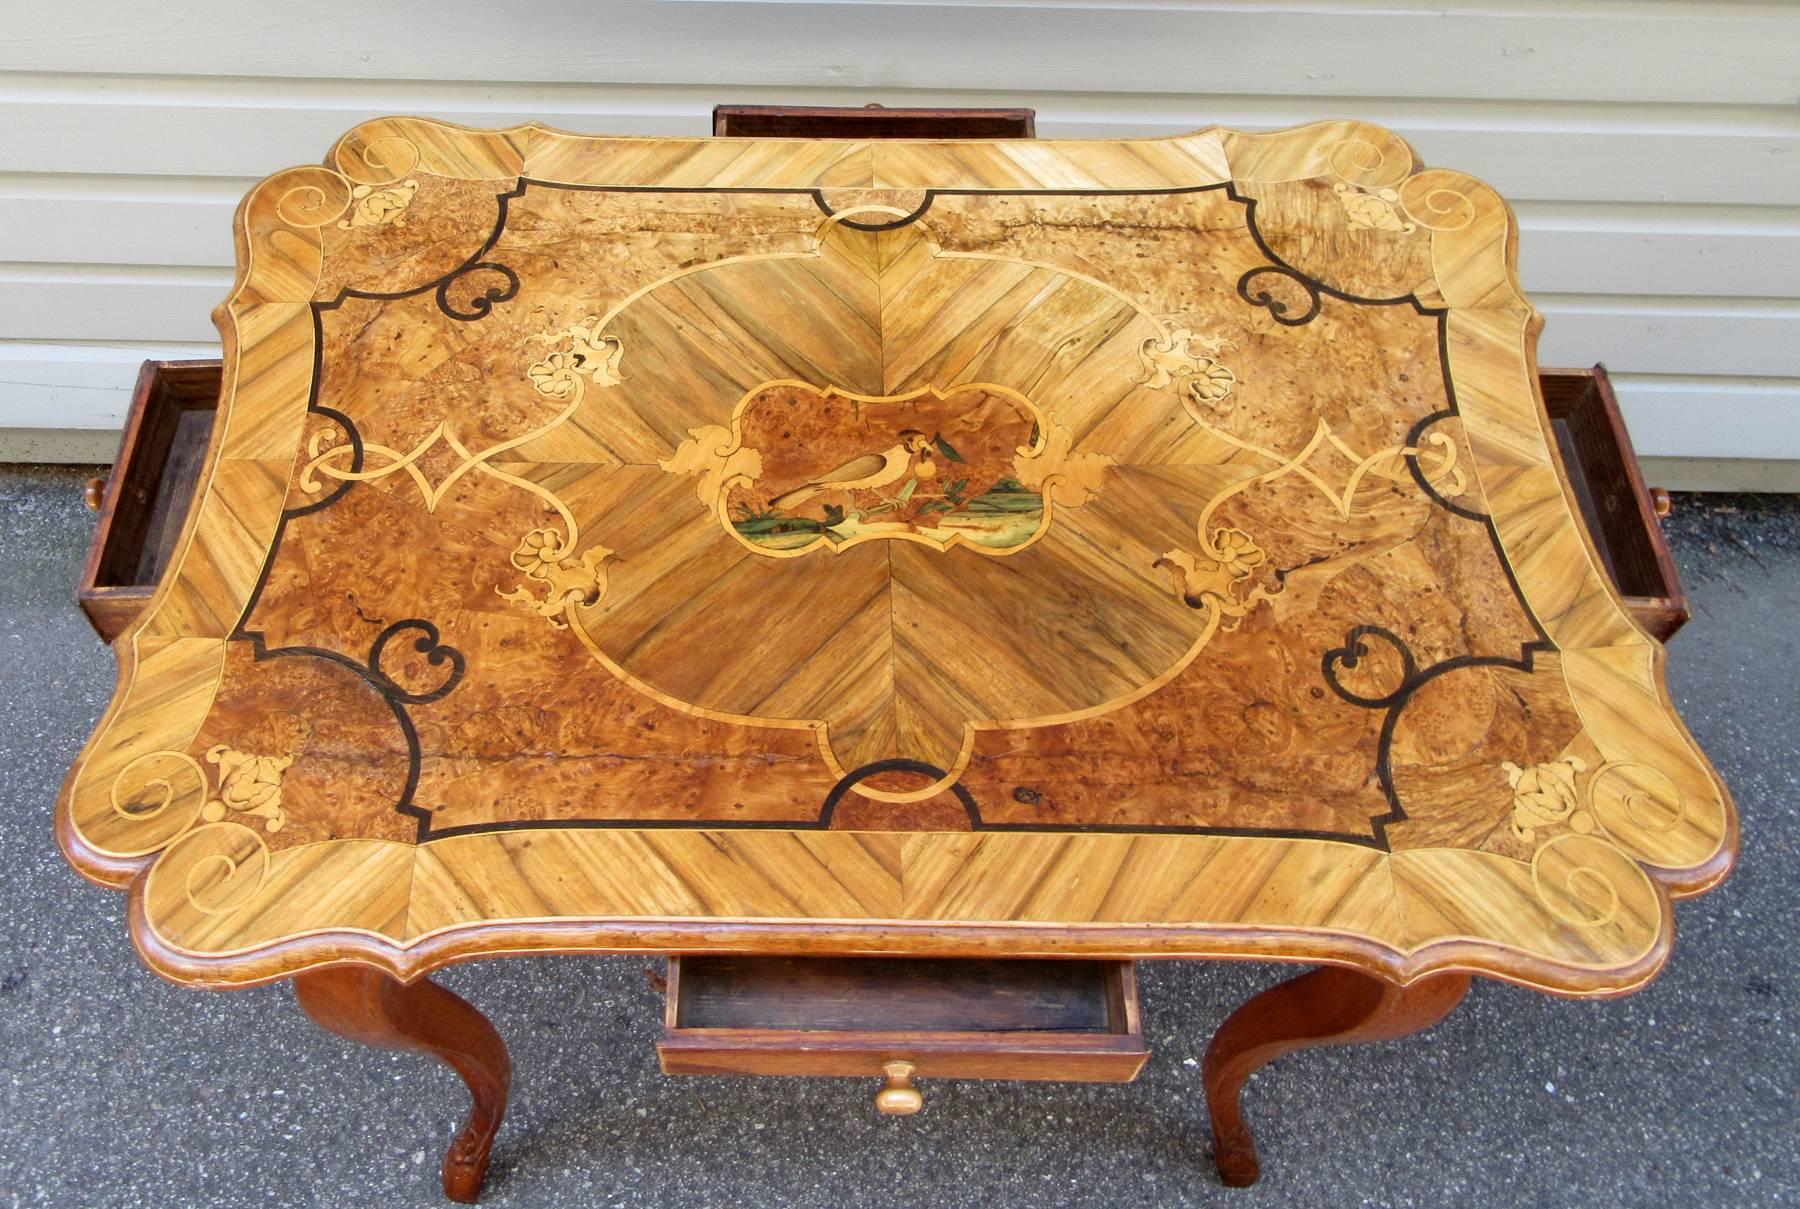 Rosewood Late 18th Century, French Provincial Marquetry Table with Perfumery Label